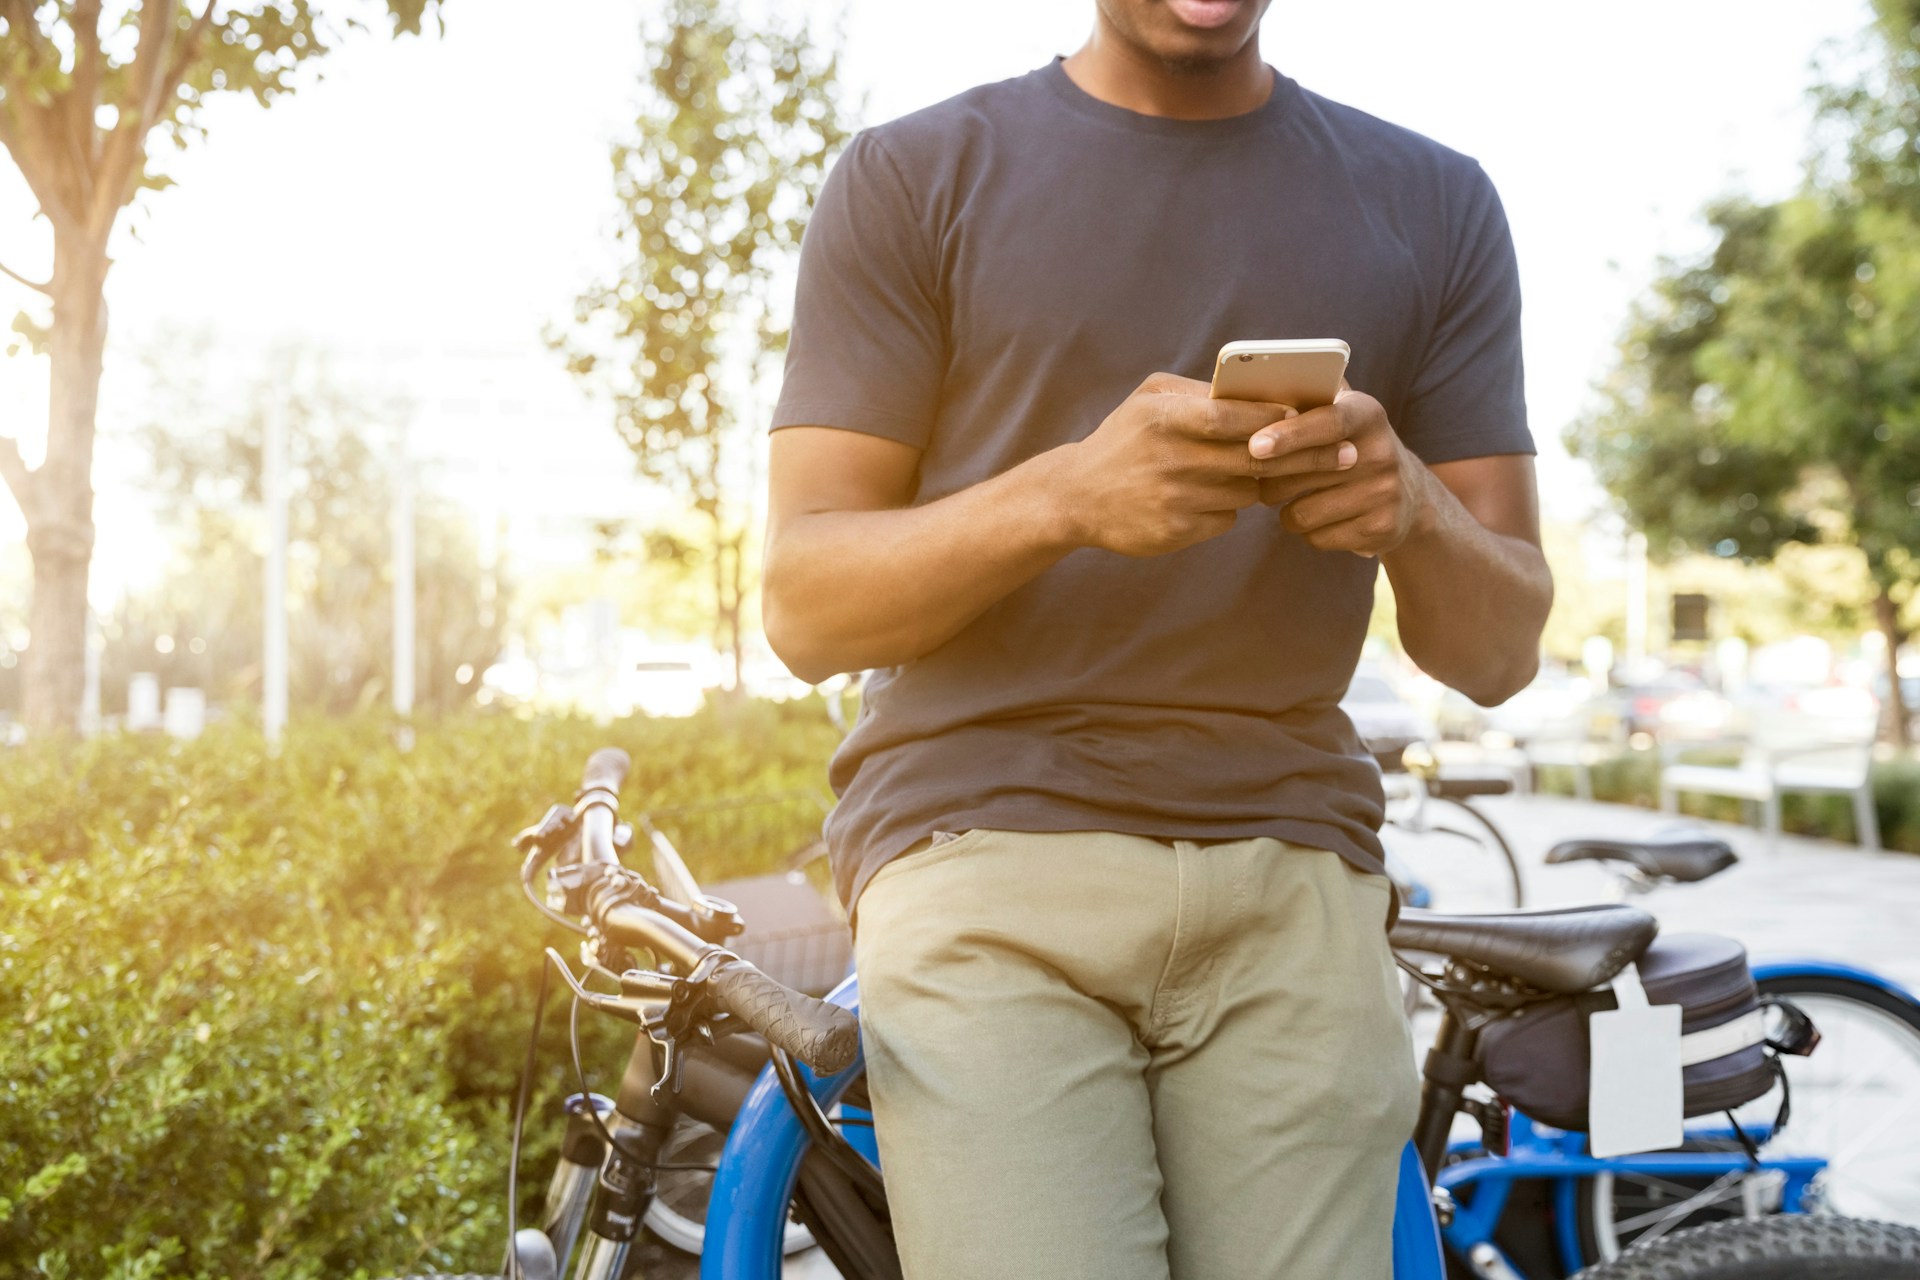 Man texting in his phone, leaning on his bike